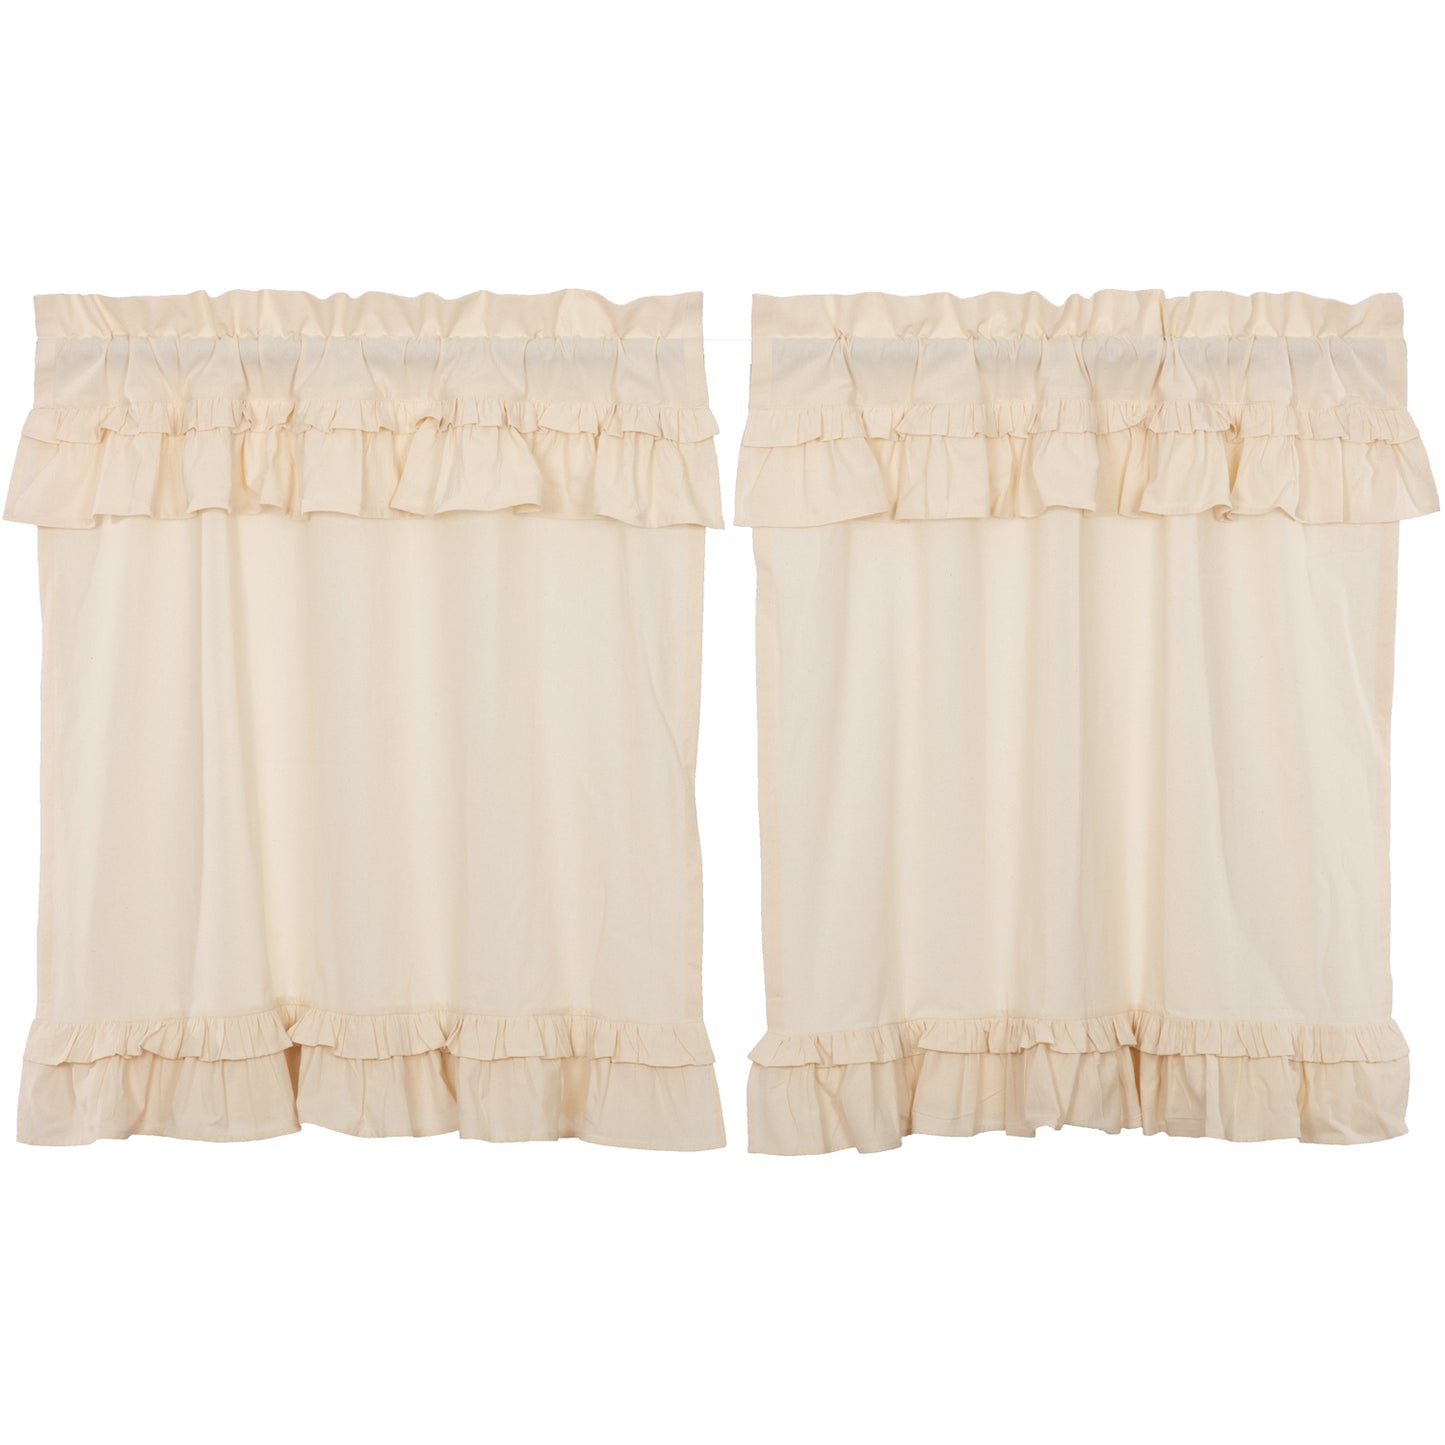 51990-Muslin-Ruffled-Unbleached-Natural-Tier-Set-of-2-L36xW36-image-6